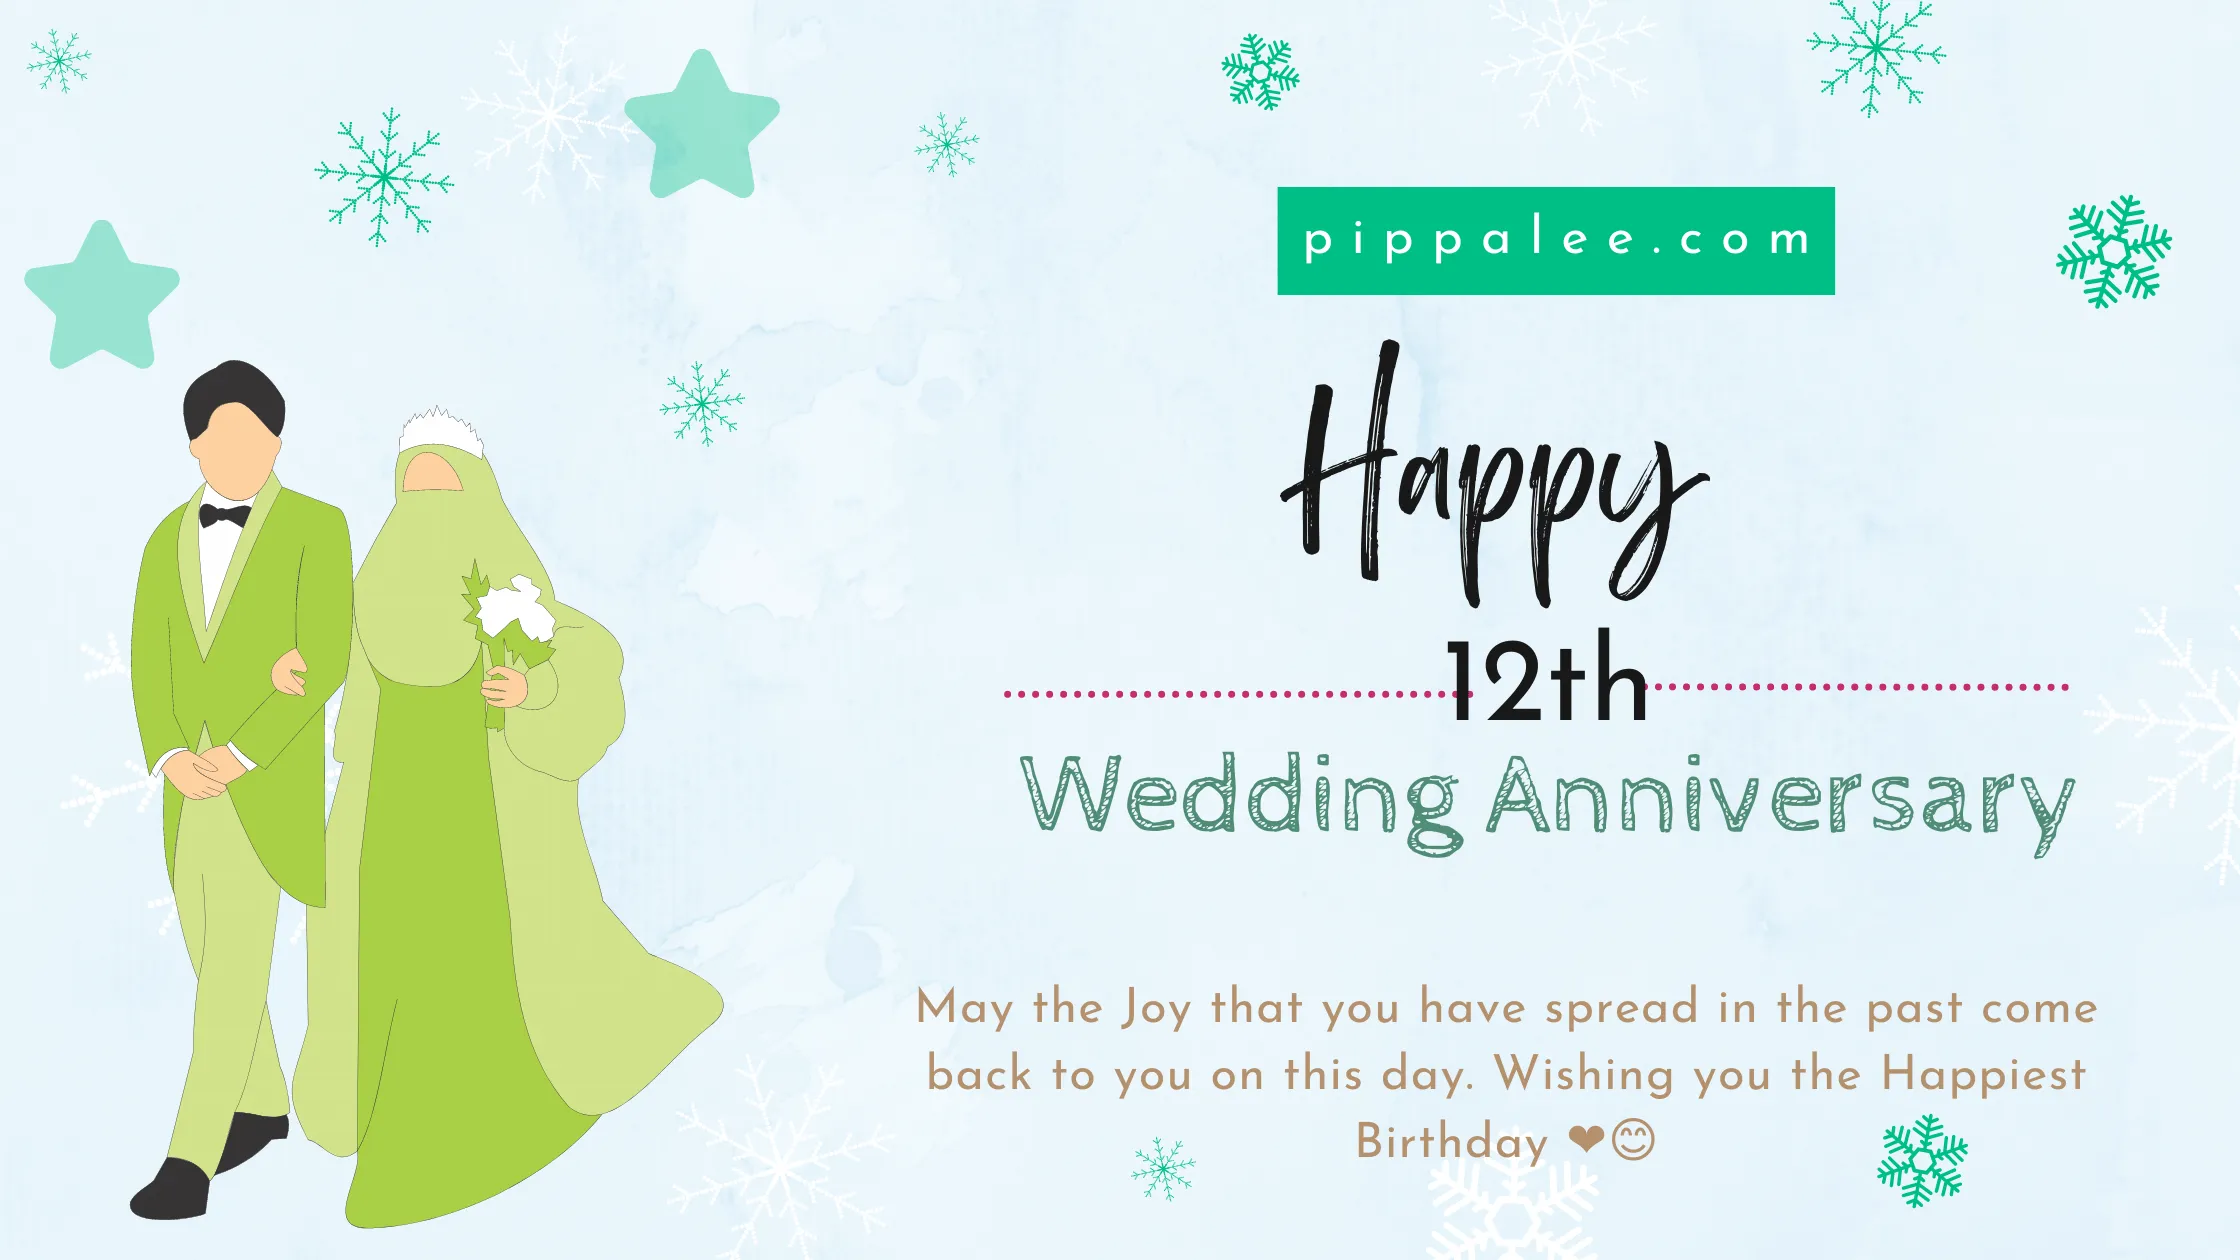 12th Wedding Anniversary - Wishes & Messages